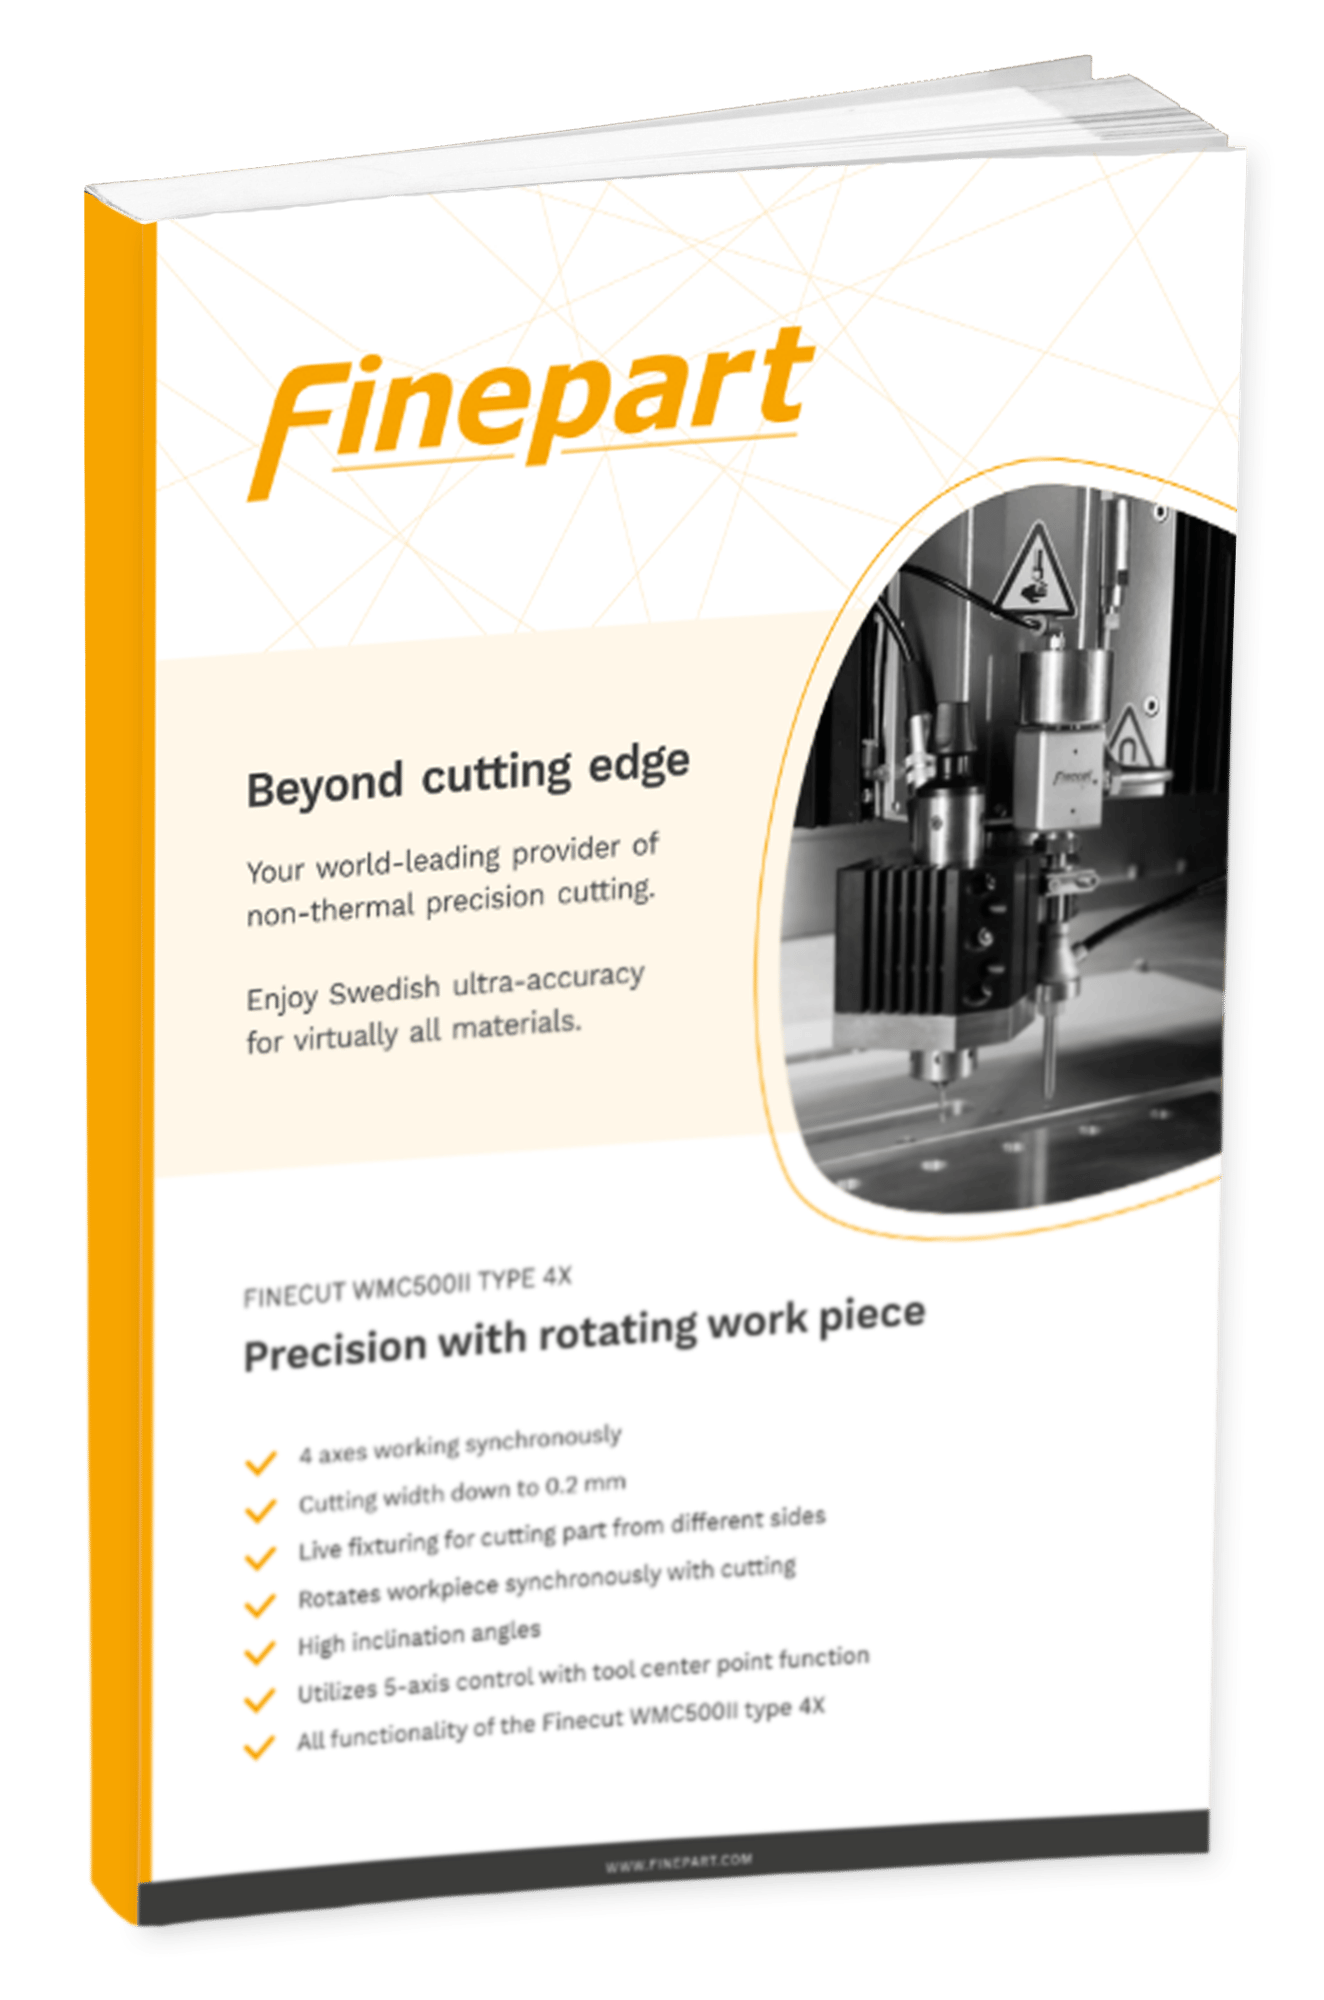 Ebook Cover Guide with Shadow Finepart Product briefing-4-axis, vA0